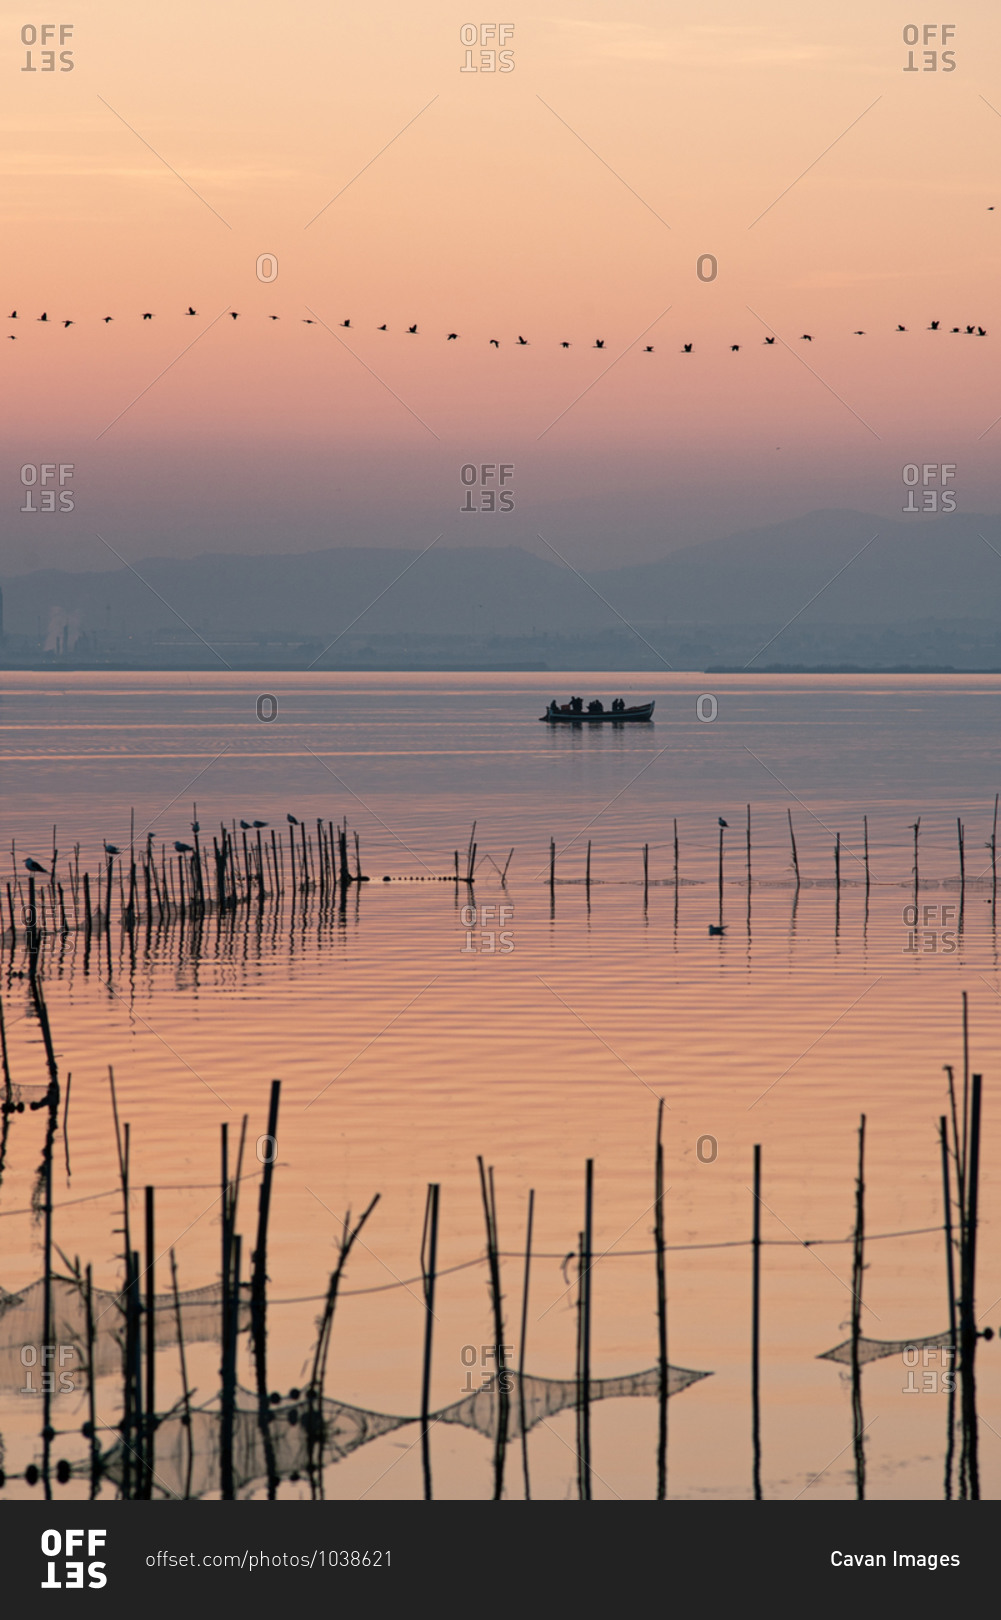 Boat and line of birds at Valencia's Albufera sunset against the light